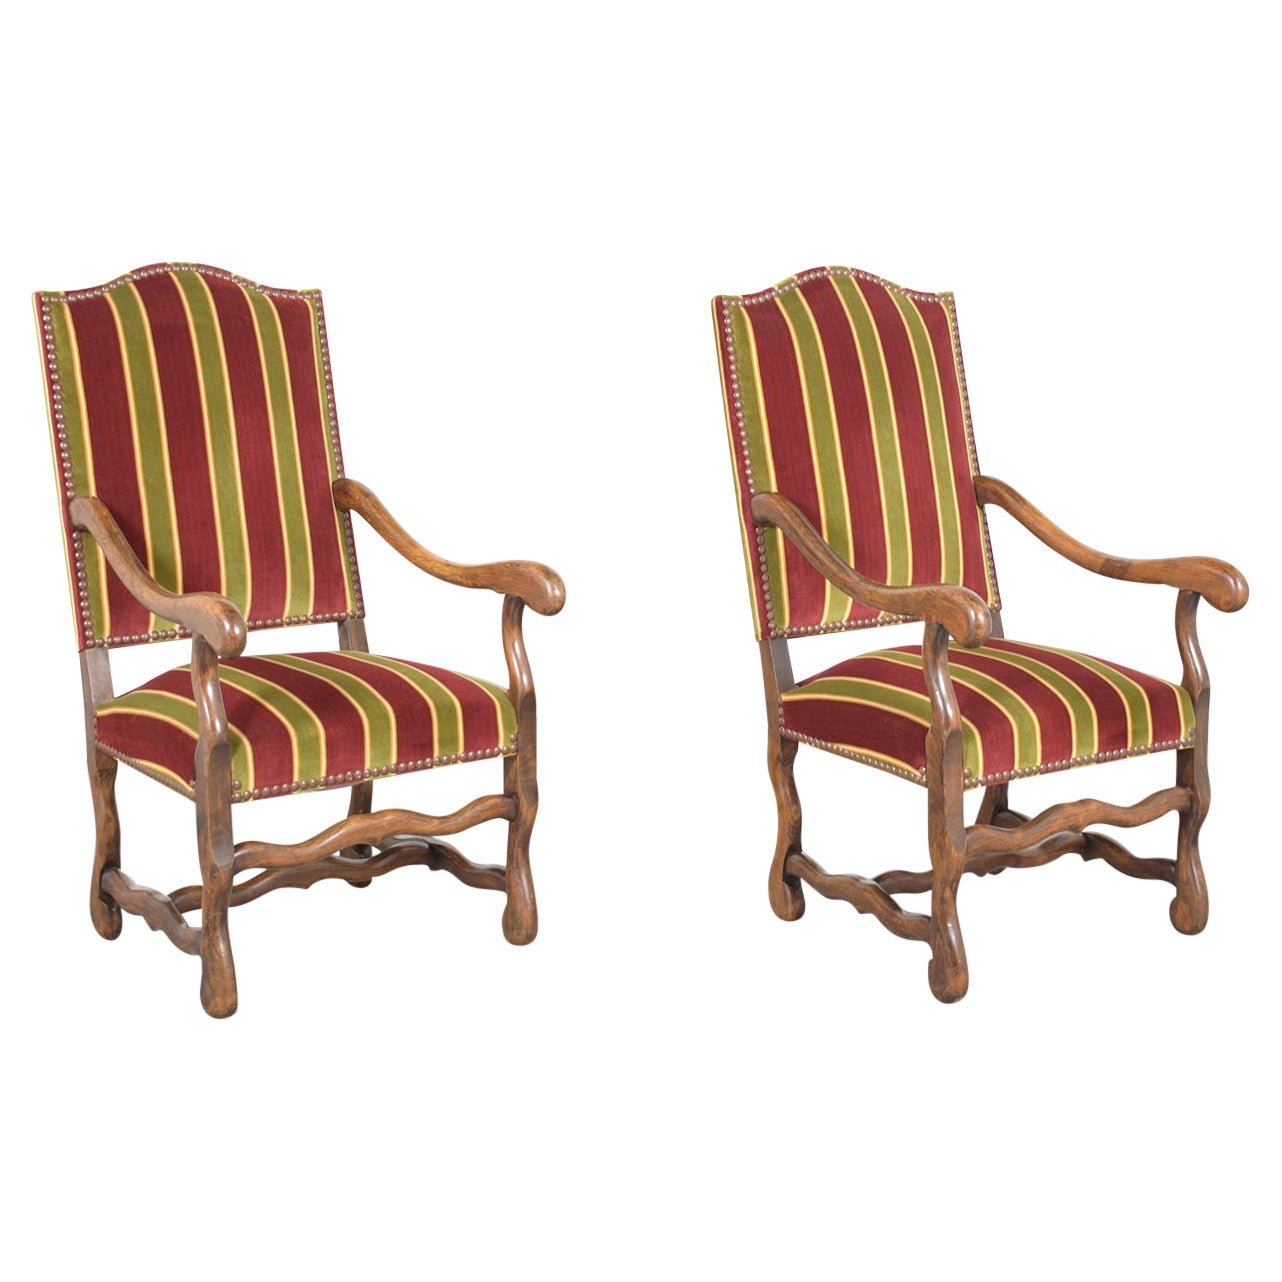 19th Century French Armchairs: Dark Walnut Finish with Striped Velvet Upholstery For Sale